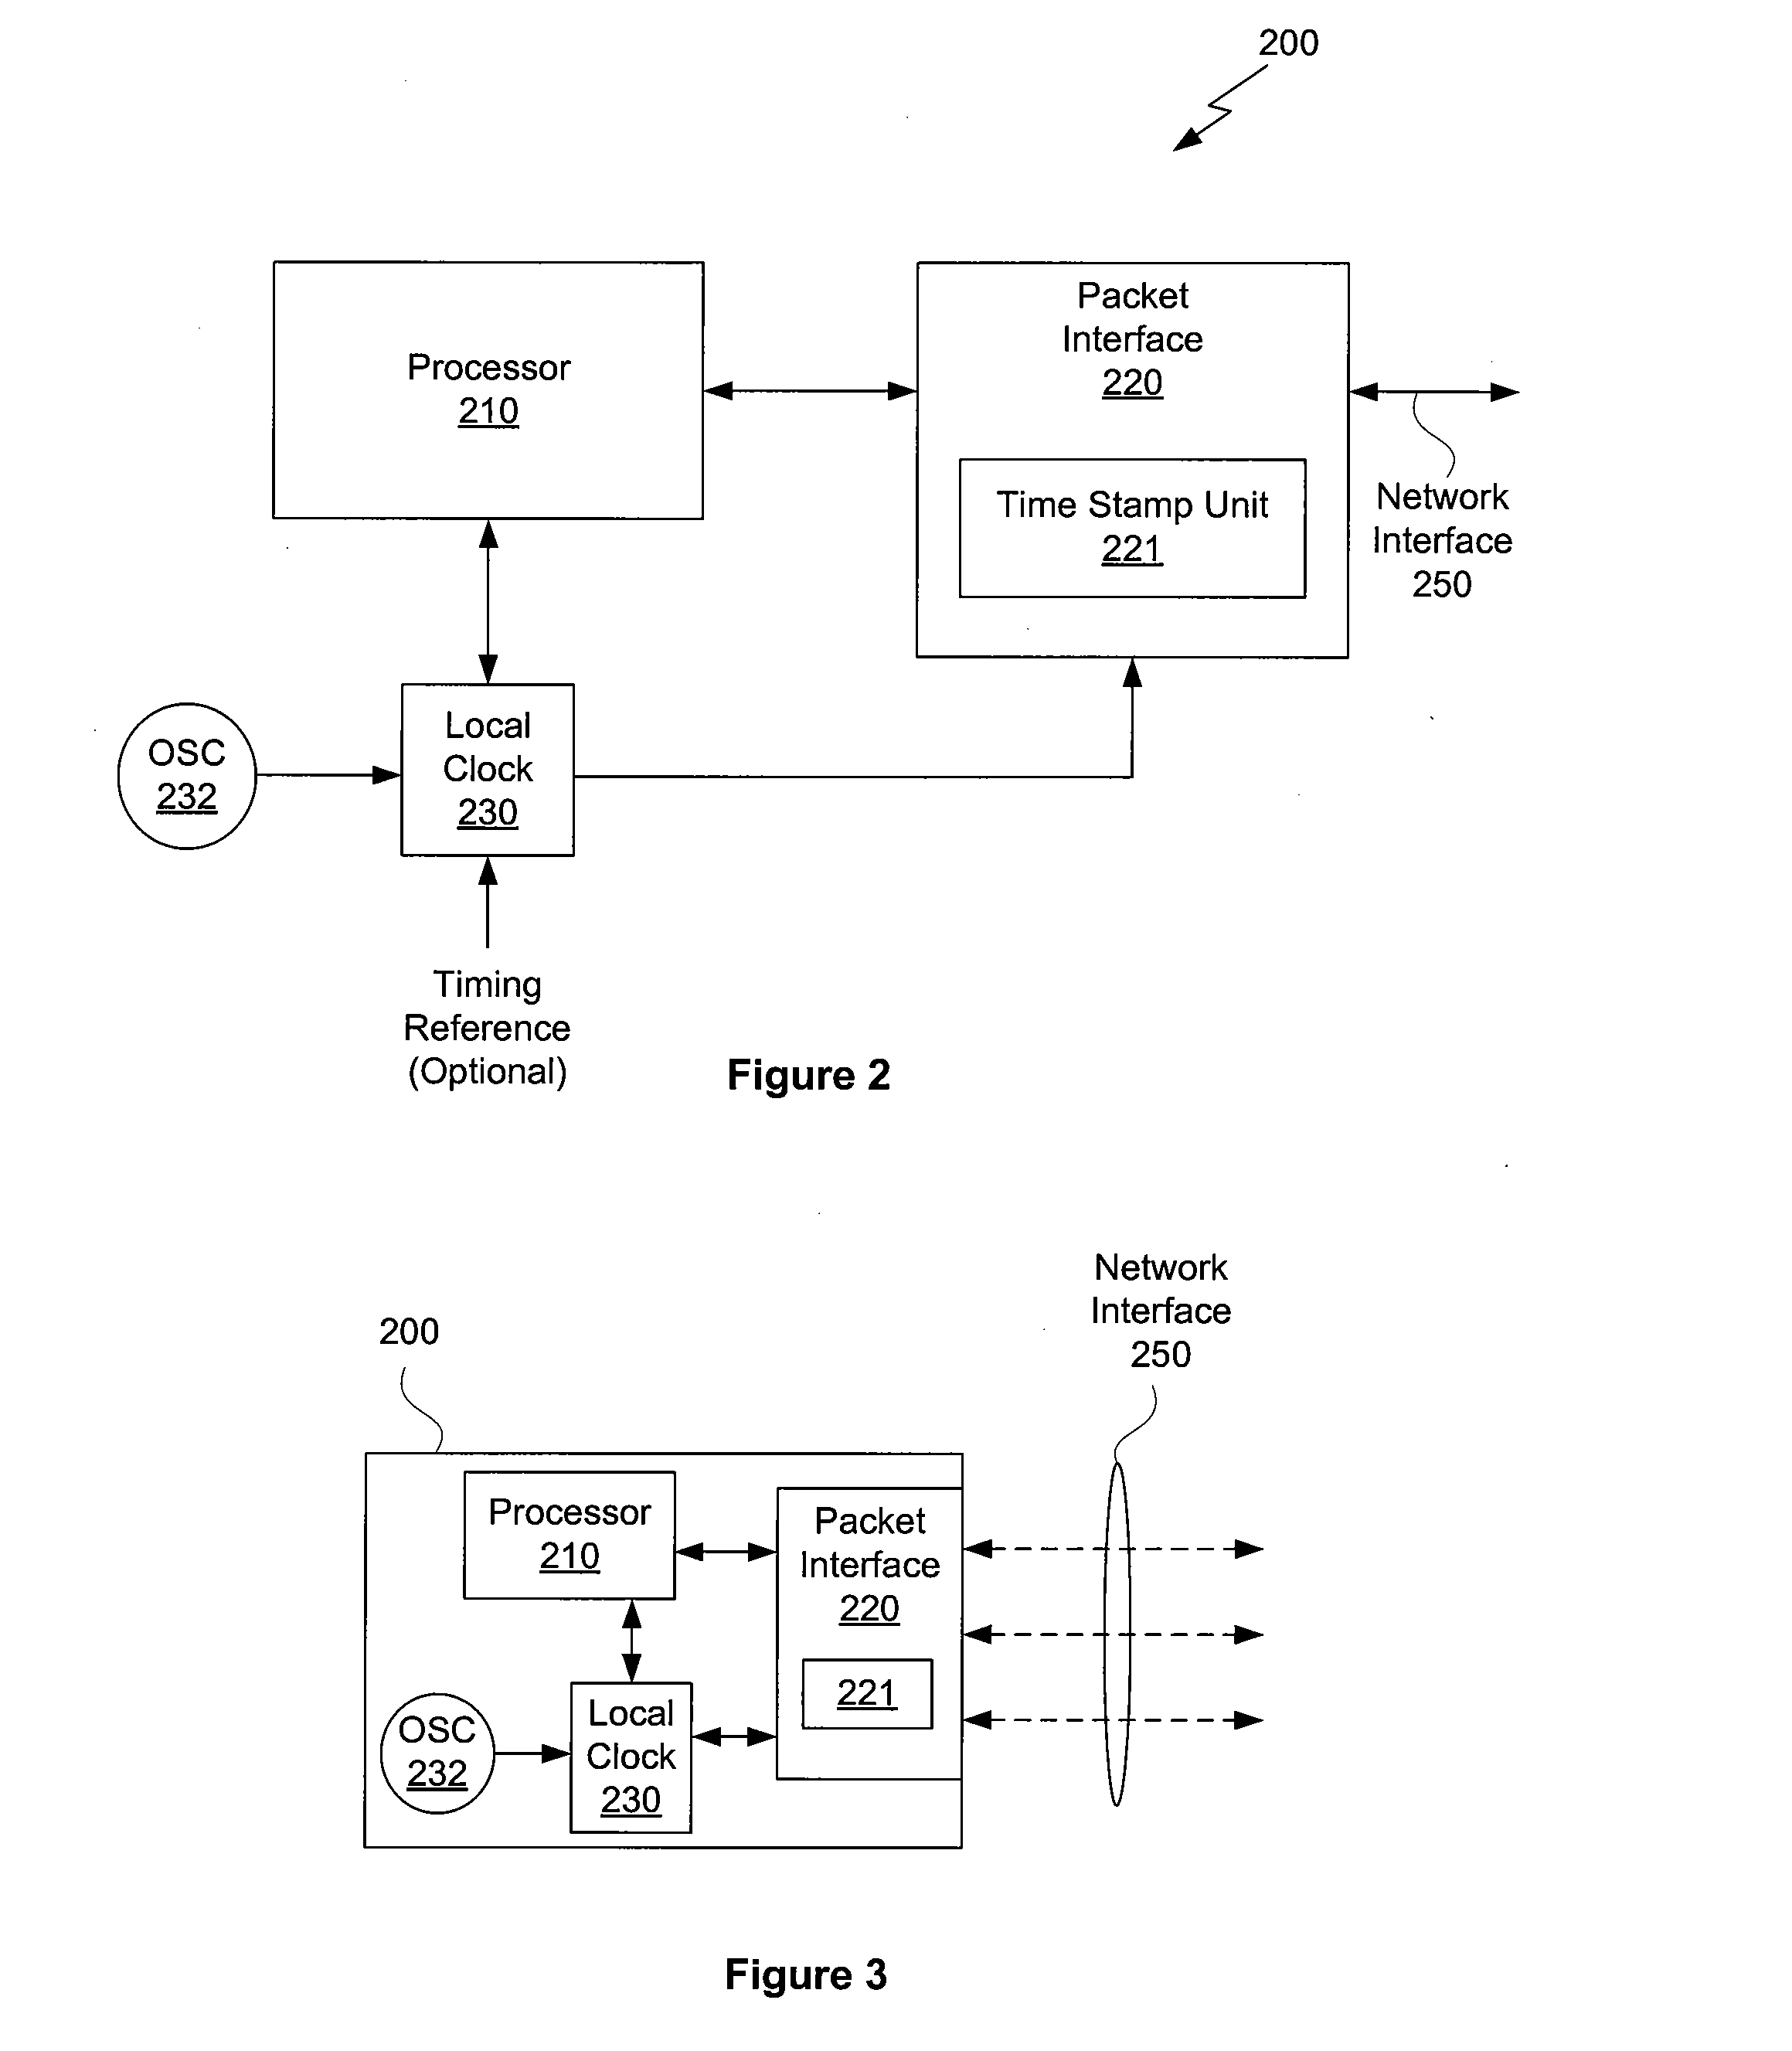 Method and system for analyzing and qualifying routes in packet networks